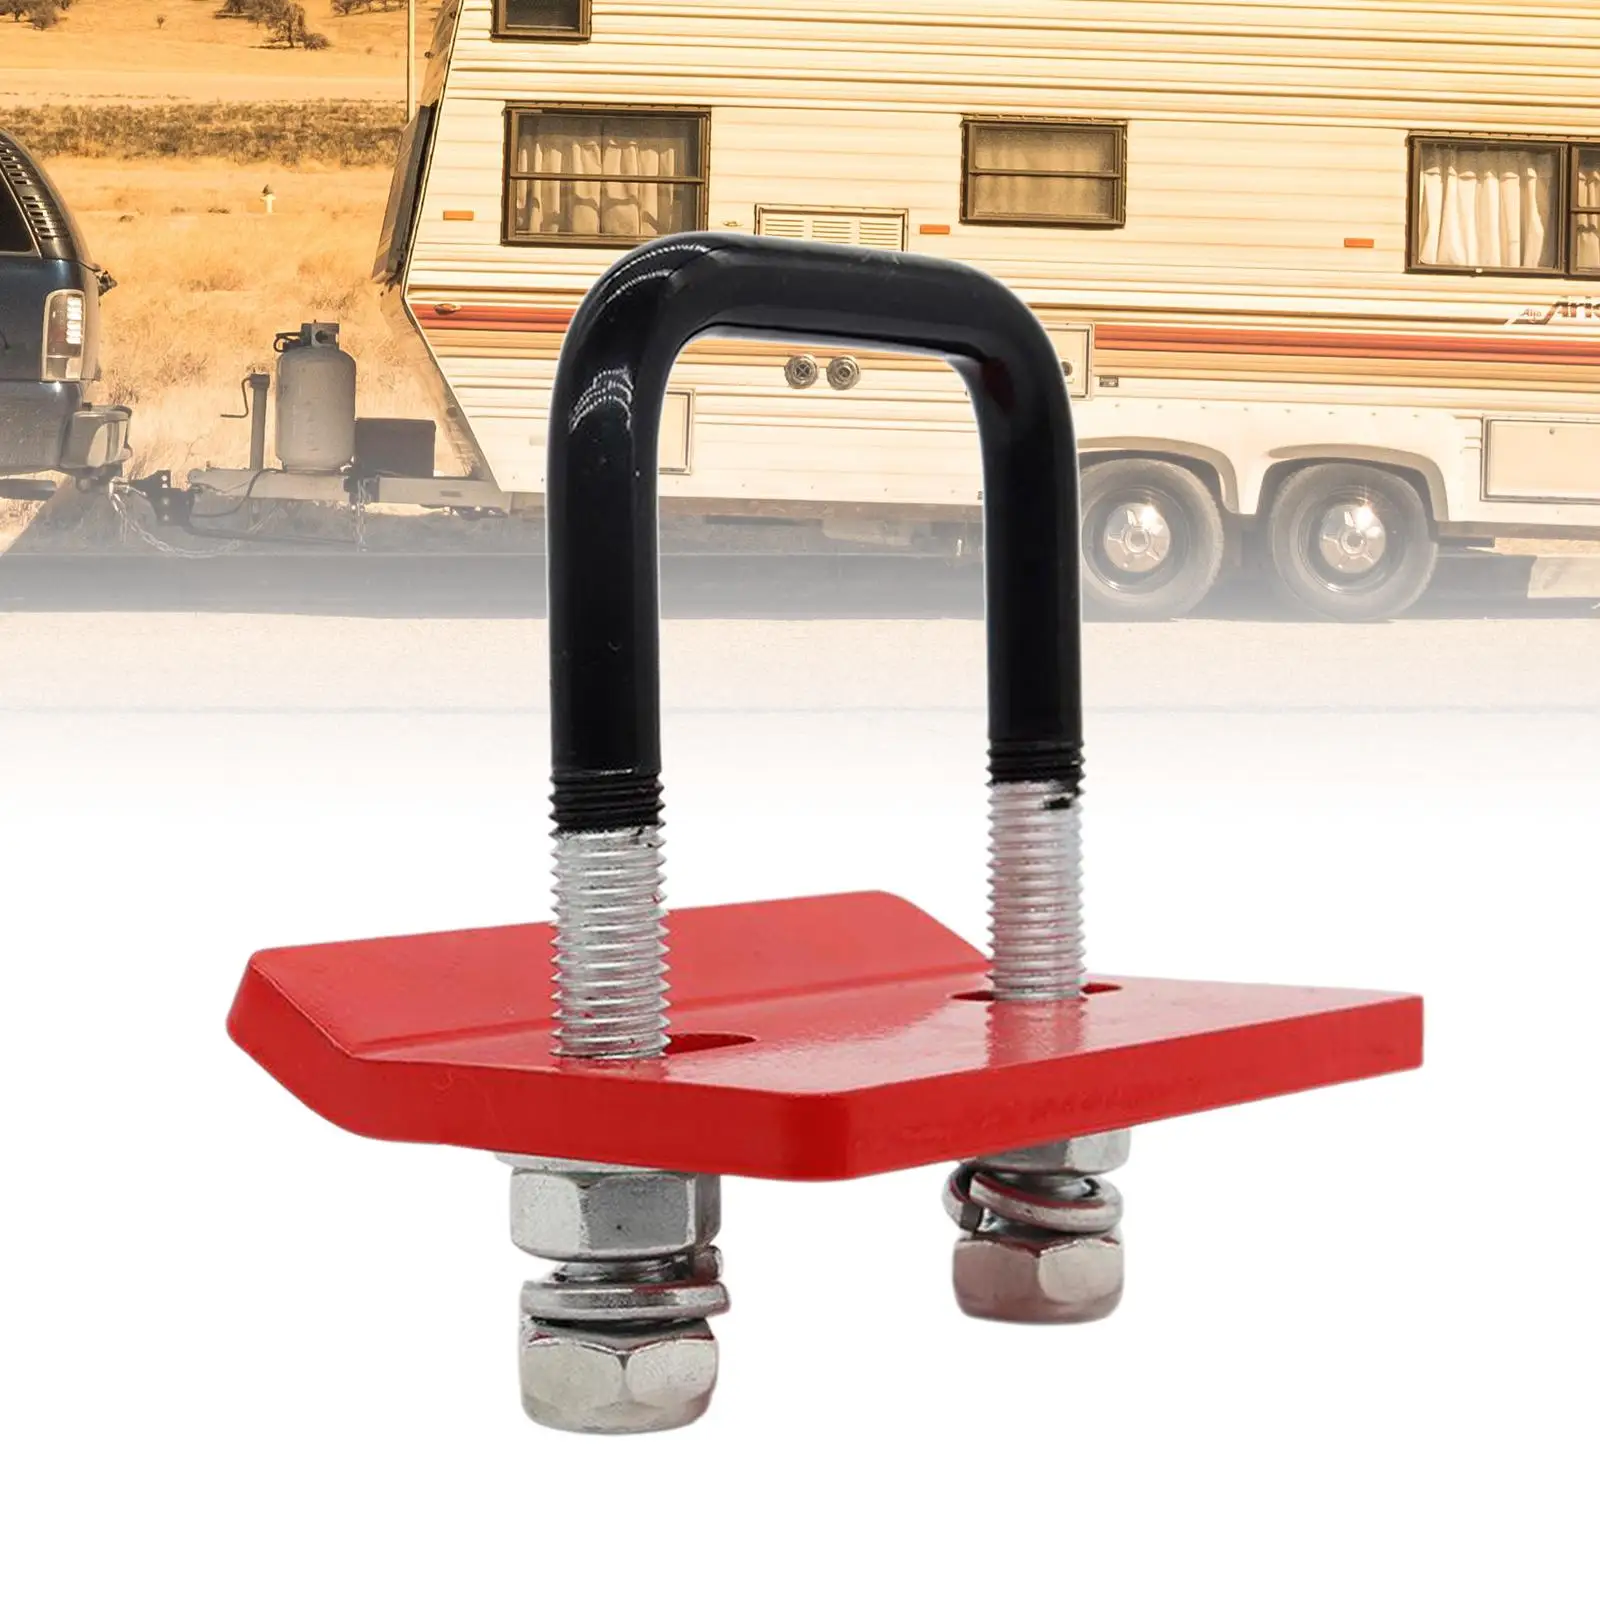 Hitch Tightener Transportation Heavy Duty Trailer Hitches Clamp Hitch Stabilizer for Boat Trailer Hitch Tray Bike Rack